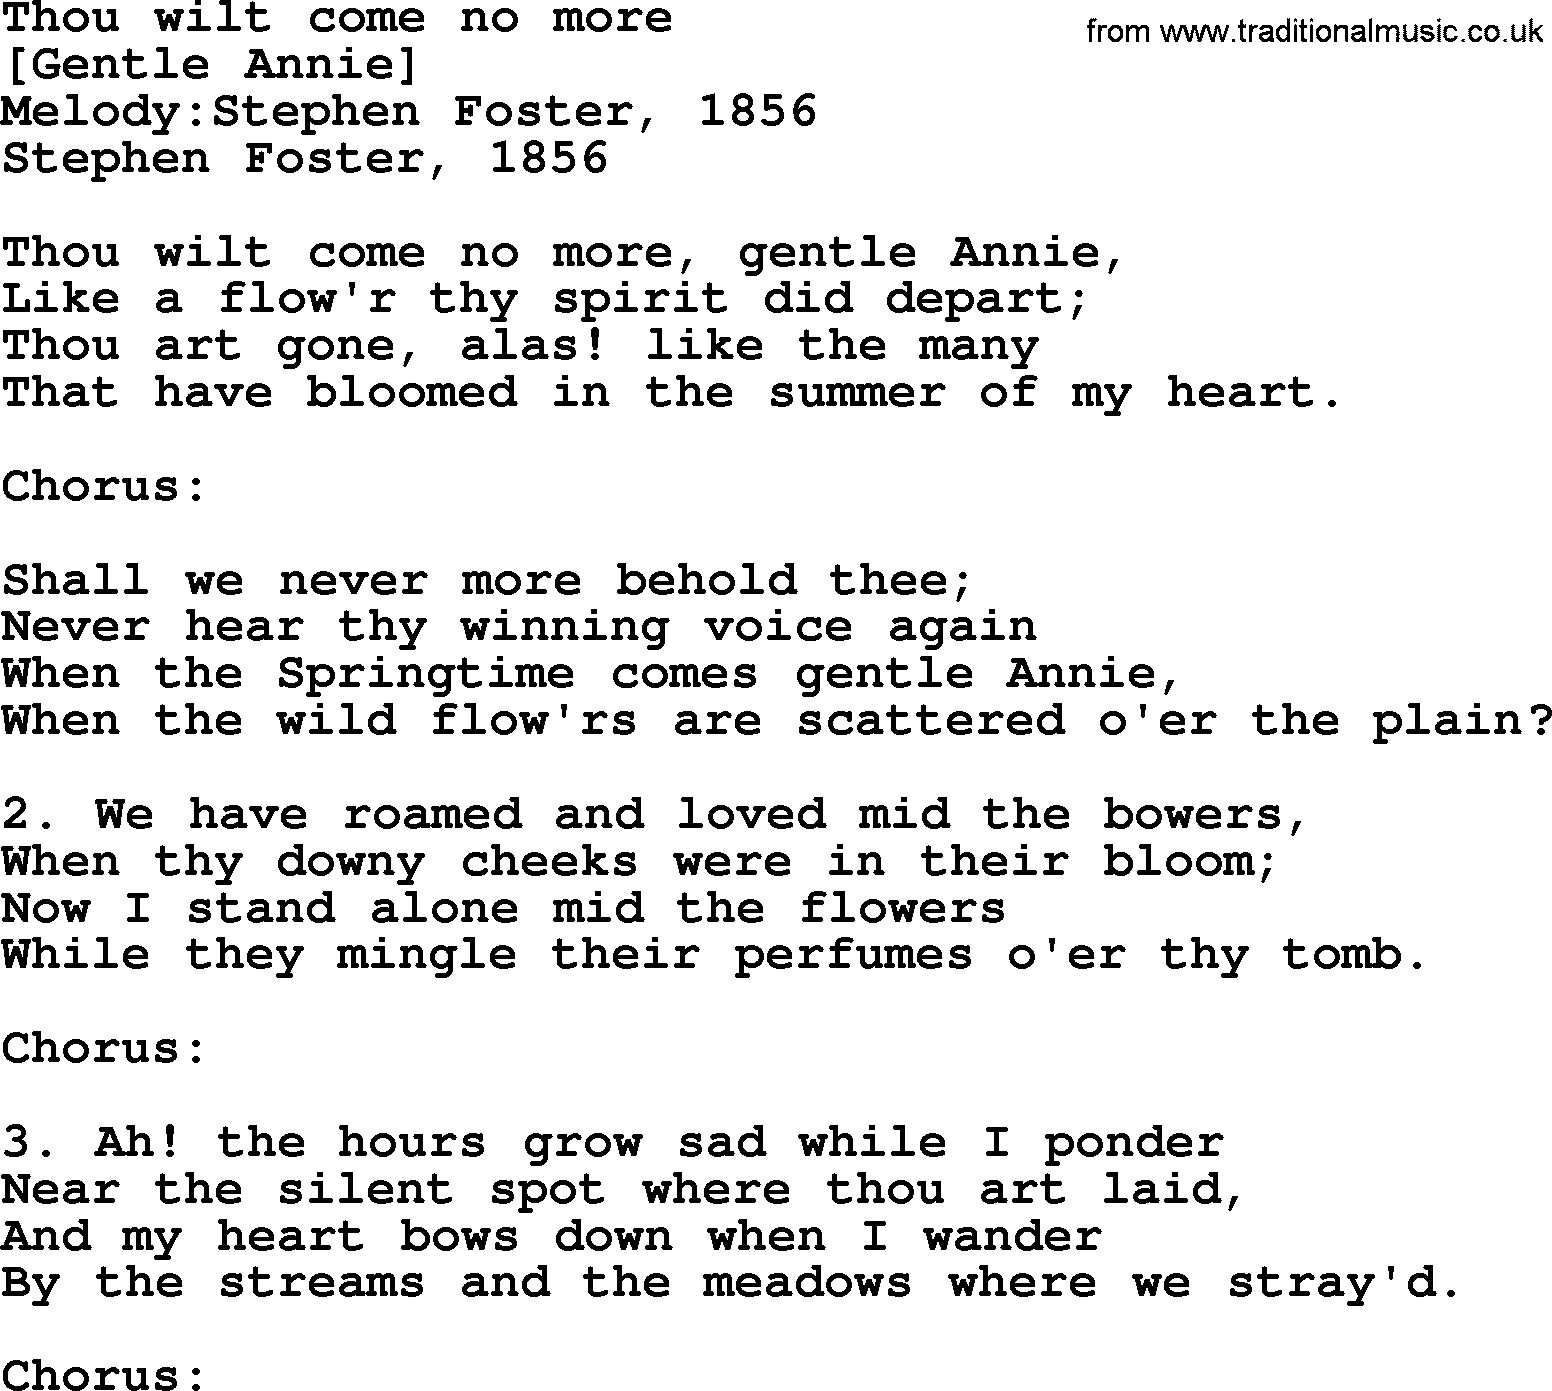 Old American Song: Thou Wilt Come No More, lyrics